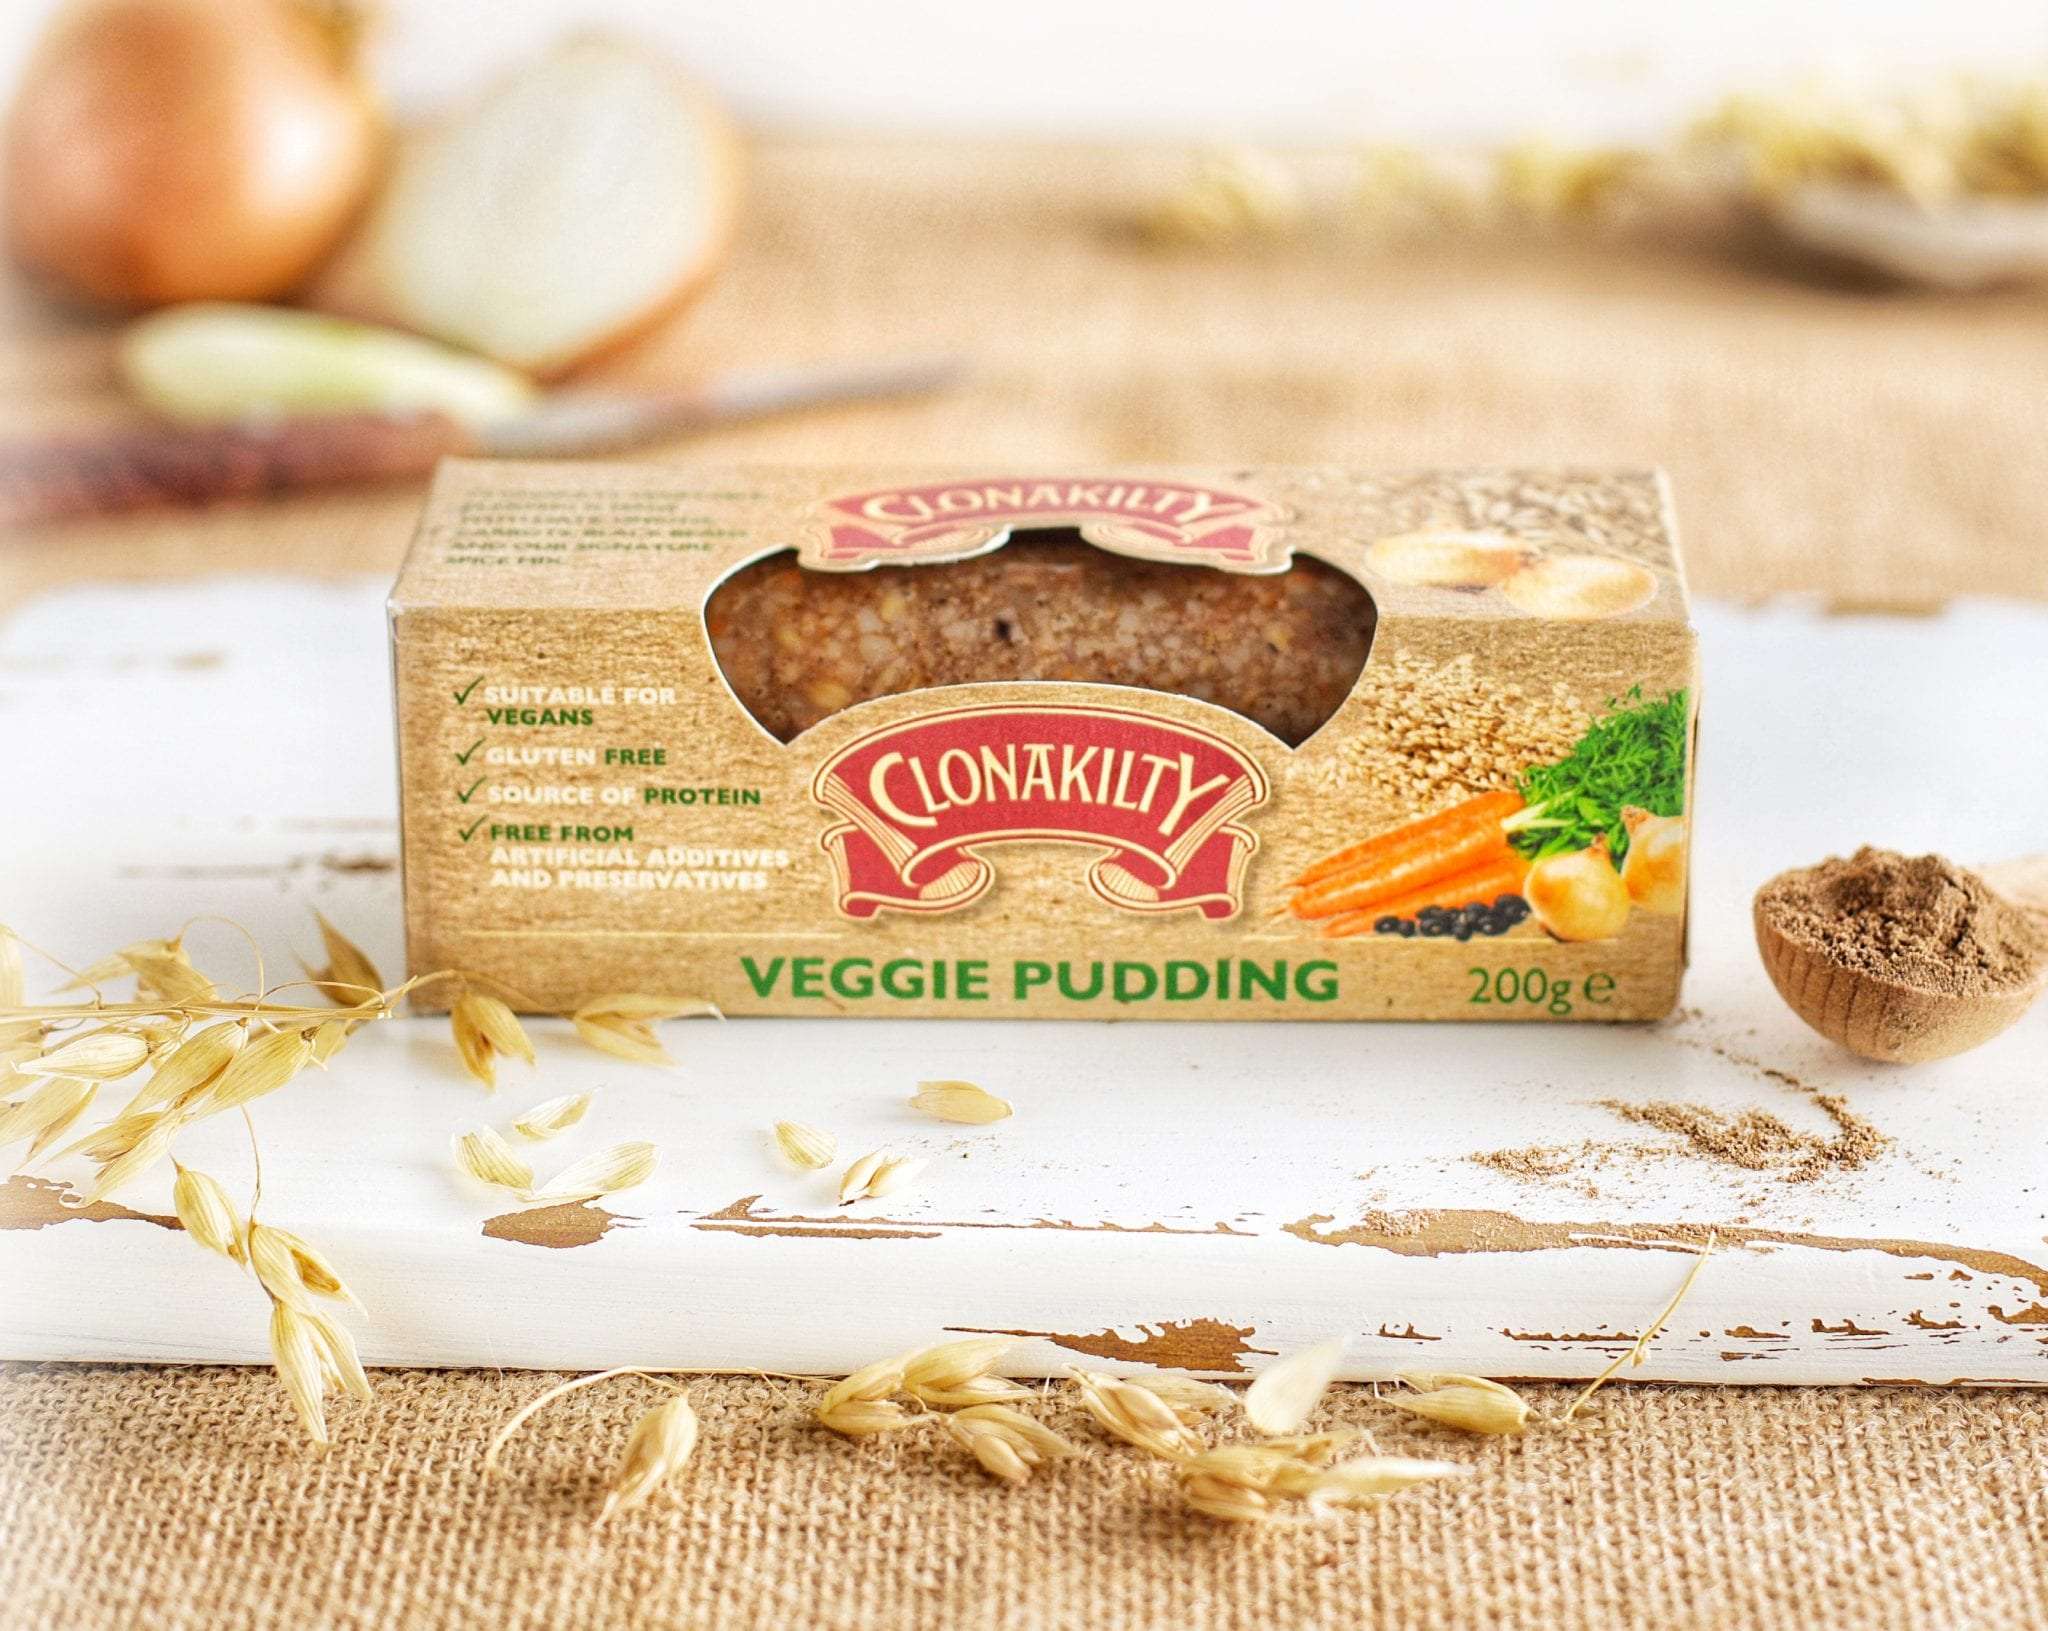 Clonakilty Veggie Pudding featured in 15 Great Irish Things to Eat